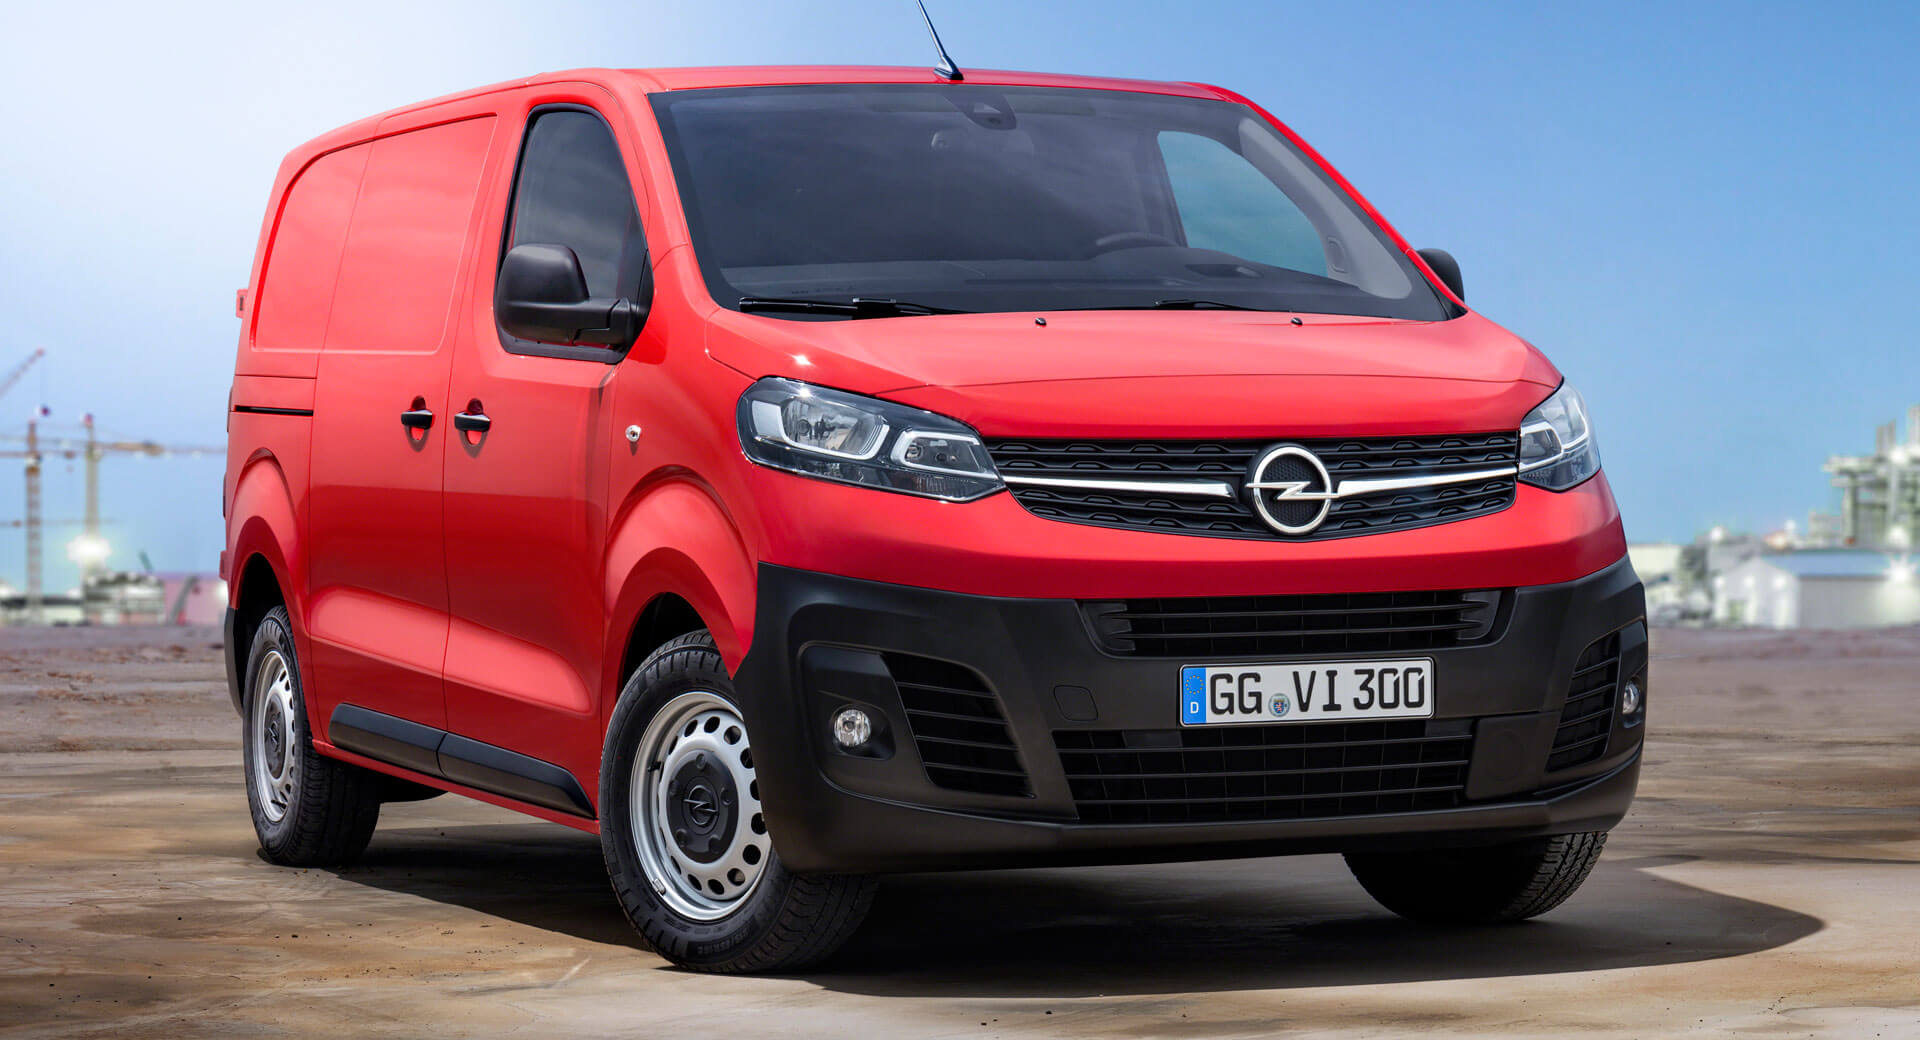 New Opel Vivaro Van Unveiled Battery Electric Coming Next Year Carscoops